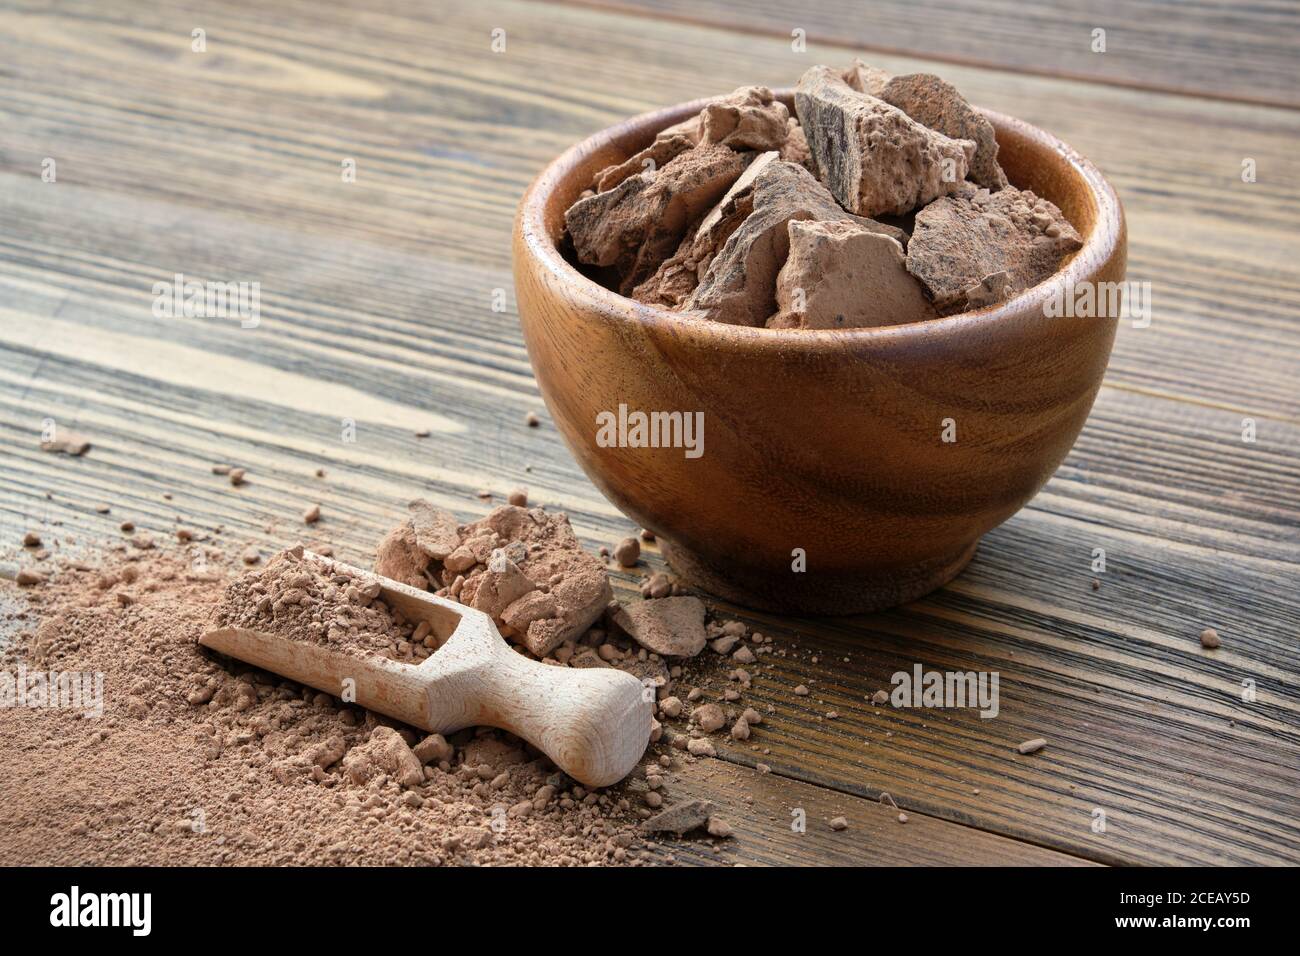 Wooden bowl of natural organic grated cocoa. Stock Photo